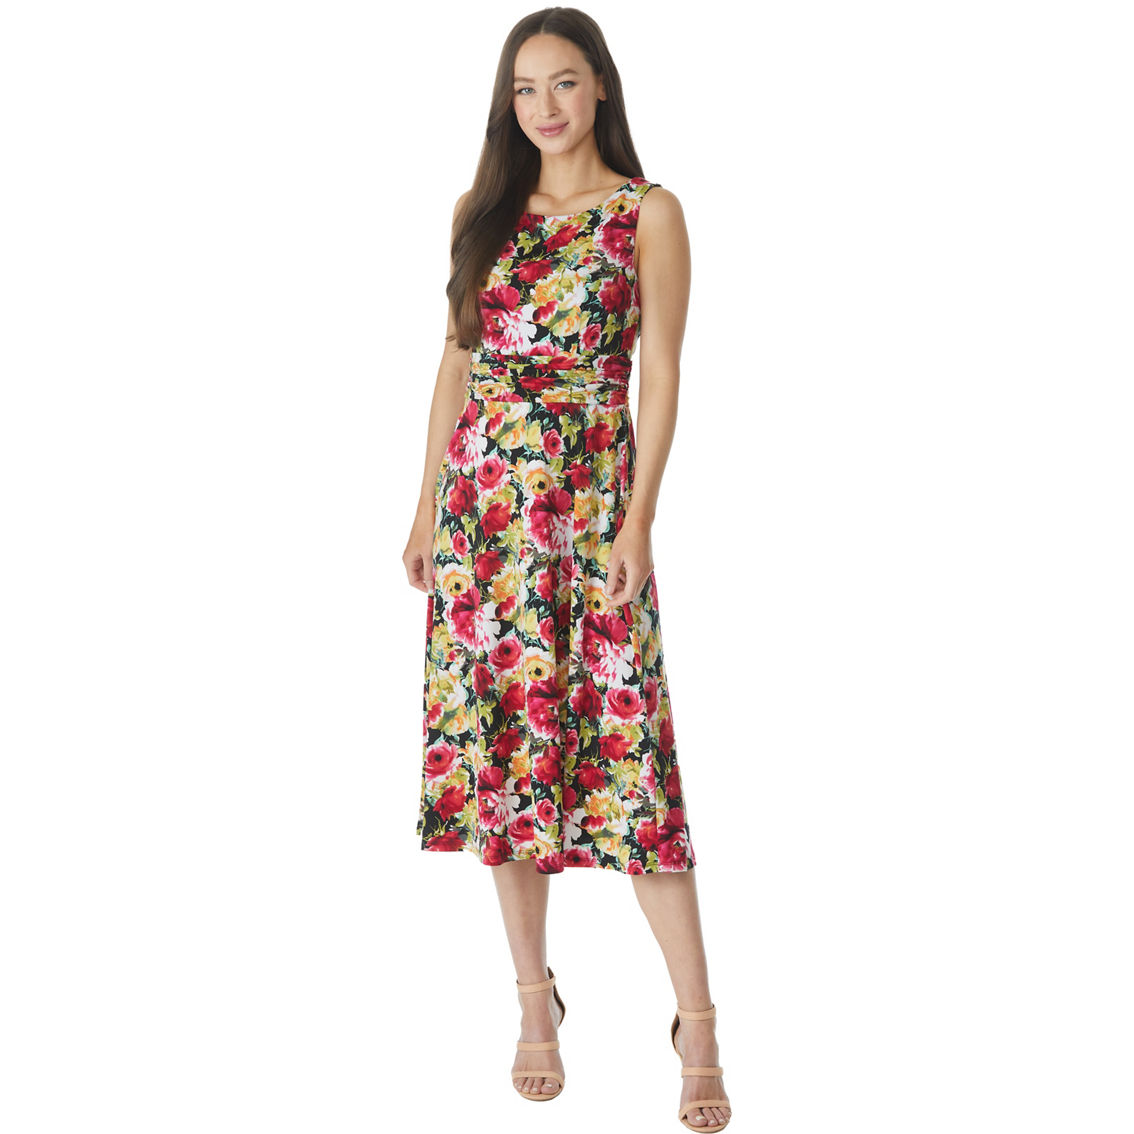 Connected Apparel Sleeveless Fitted ITY Floral Dress - Image 4 of 5